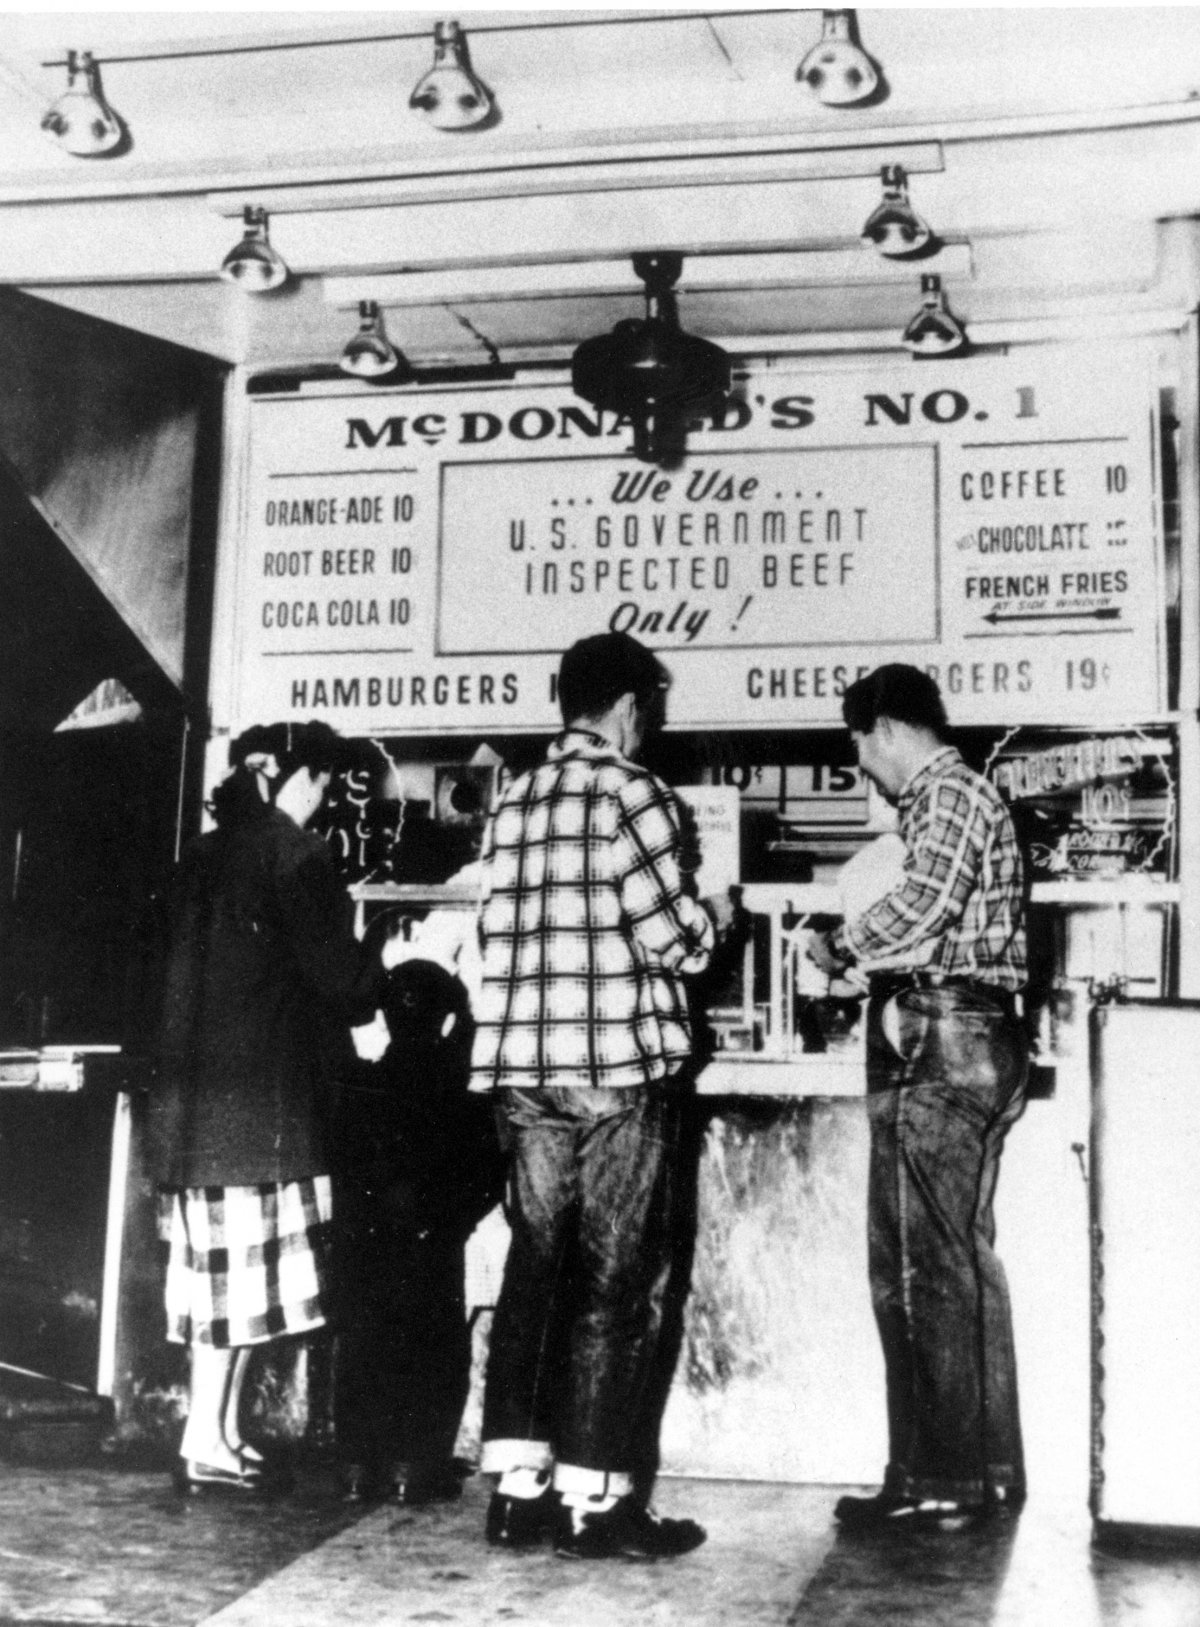 Customers line up outside the first McDonalds hamburger stand which was opened in 1948 by brothers Dick and Maurice McDonald in San Bernadino, California